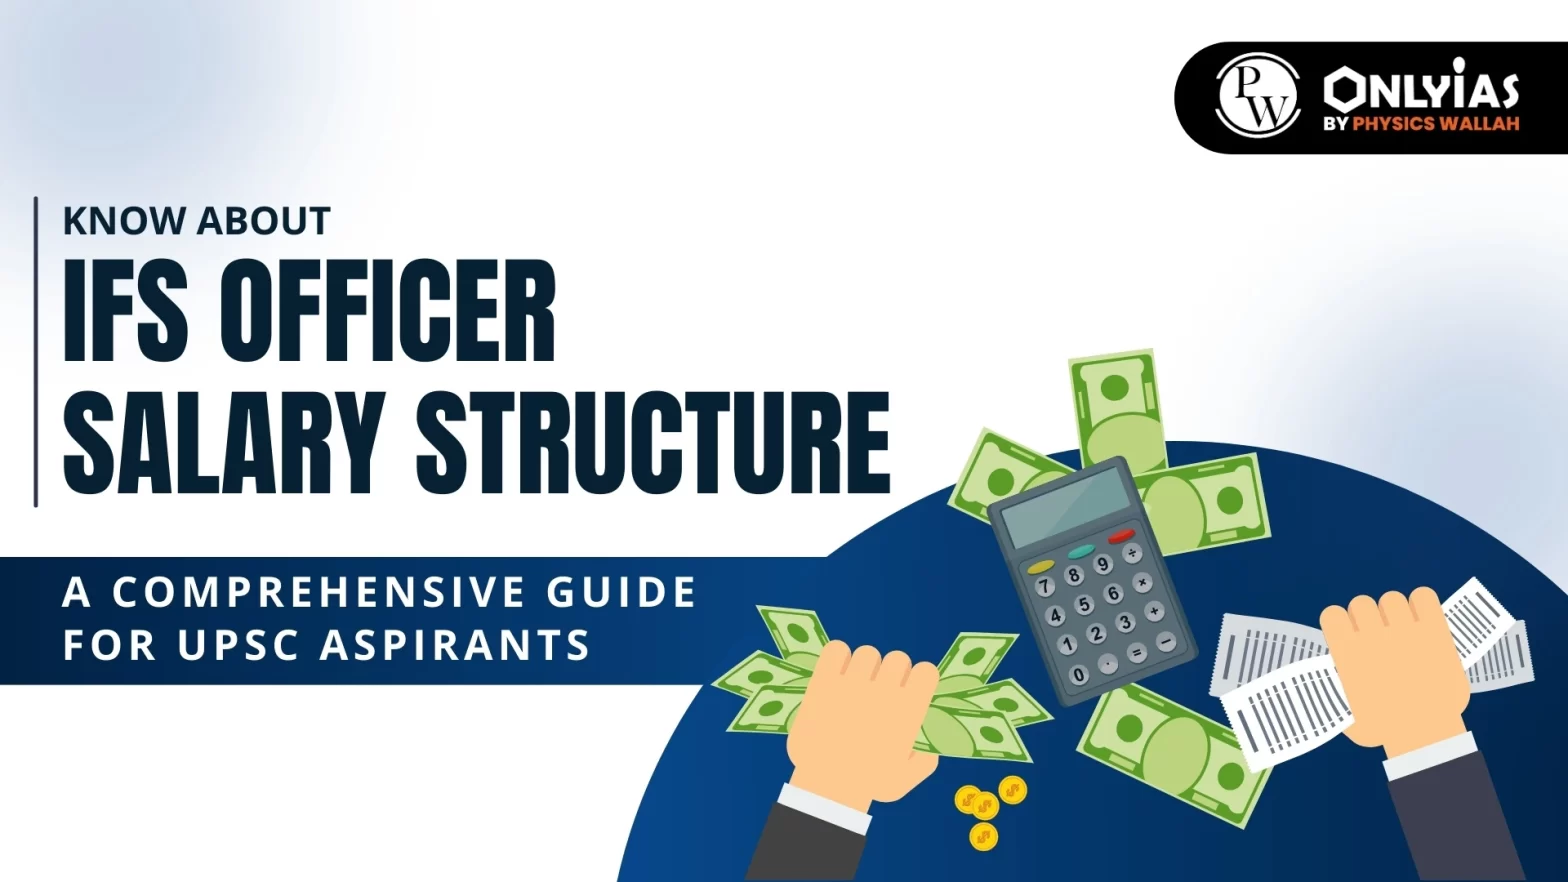 Know about IFS Officer Salary Structure: A Comprehensive Guide for UPSC Aspirants